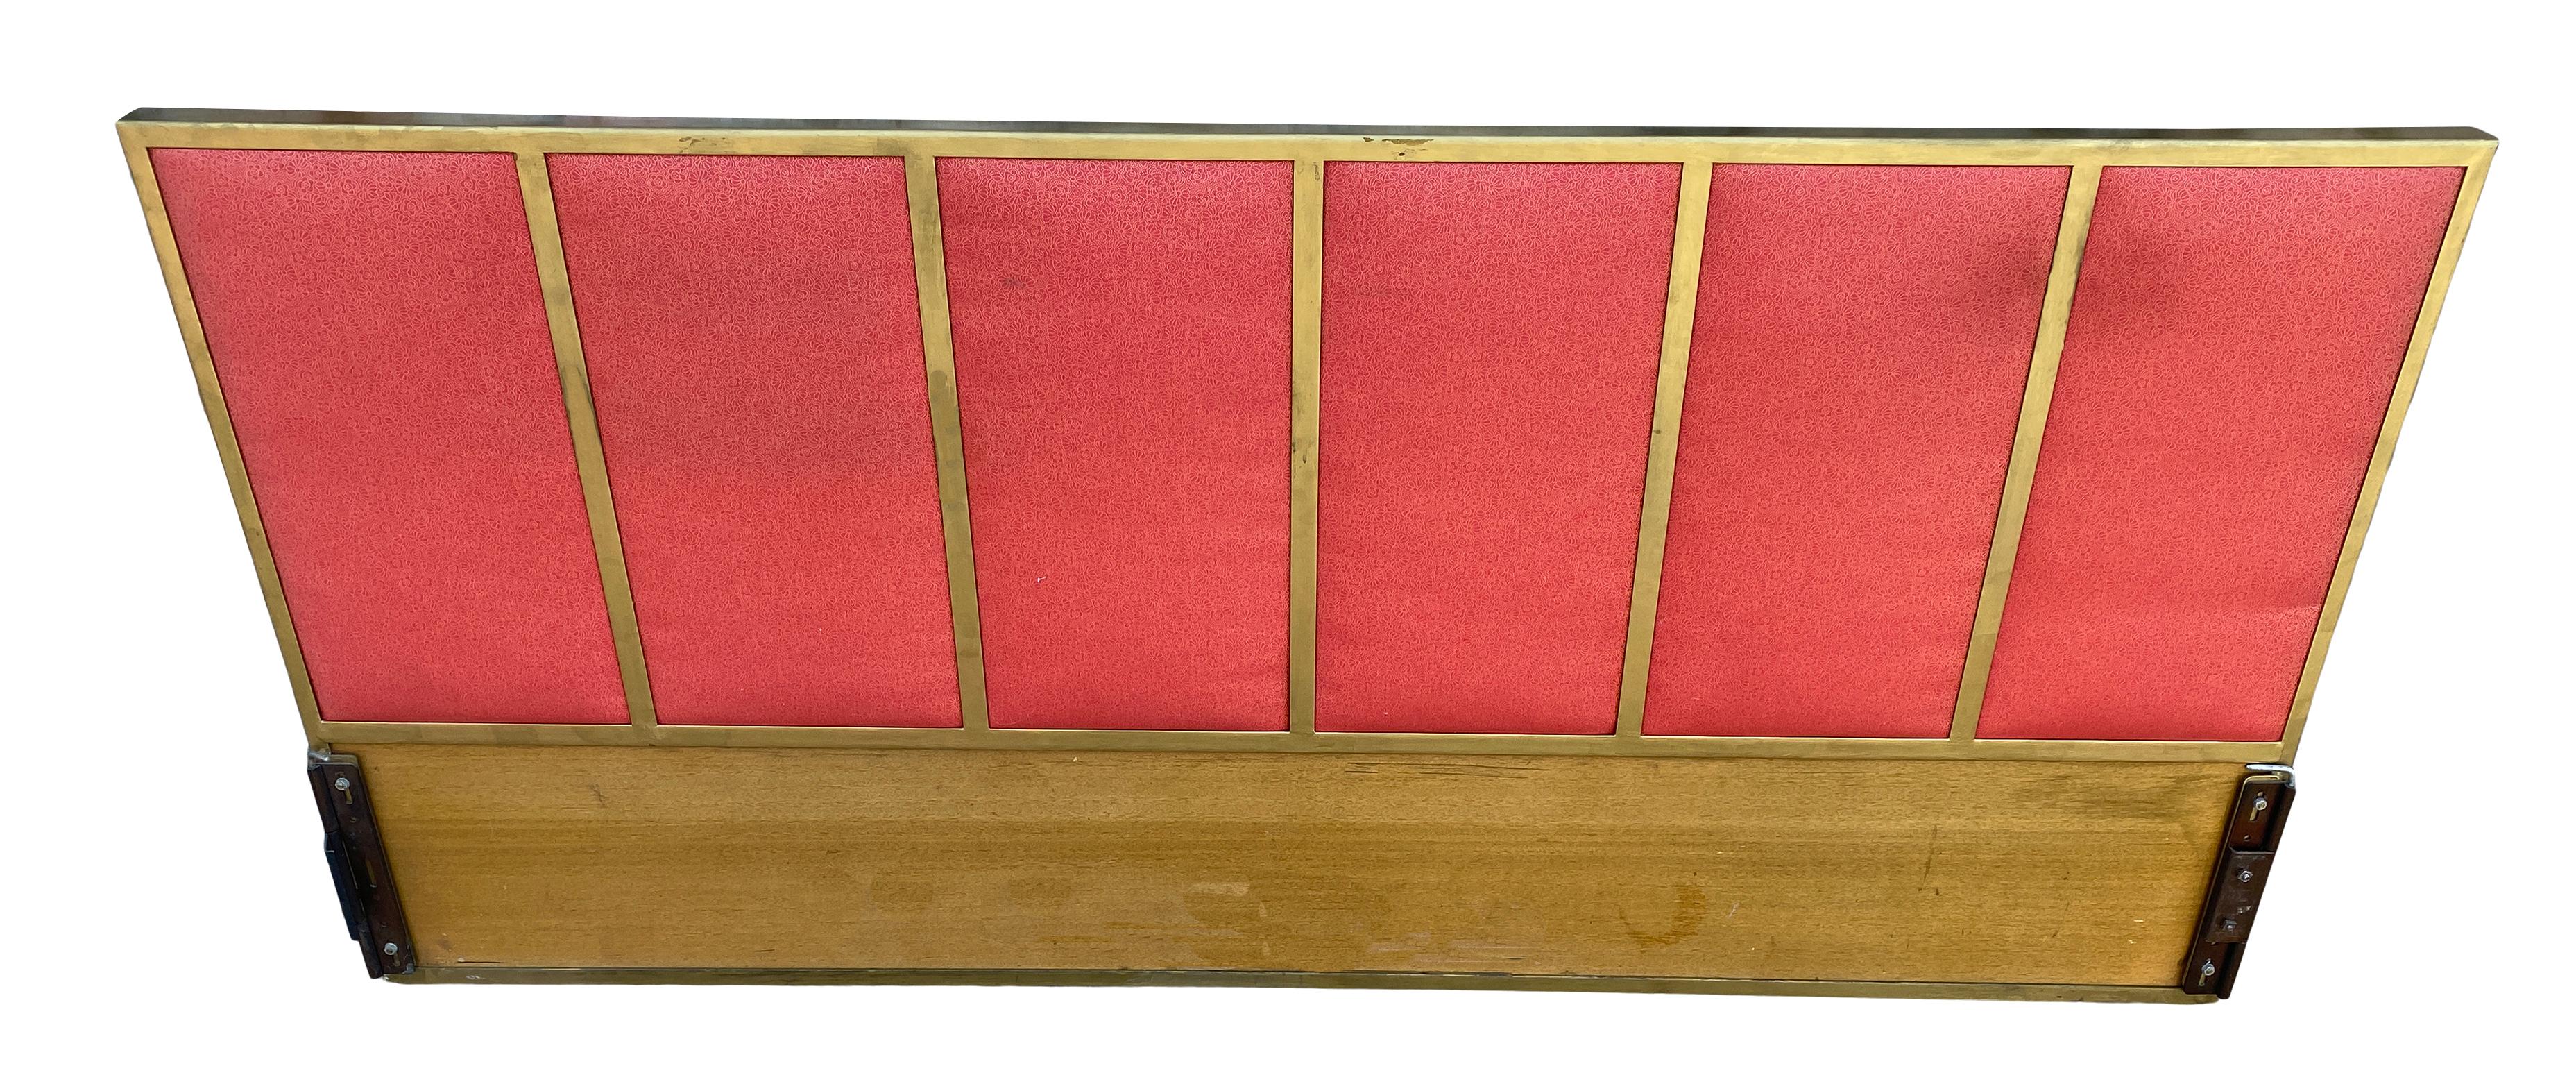 Beautiful Midcentury Brass Headboard by Paul McCobb for Calvin King In Good Condition For Sale In BROOKLYN, NY